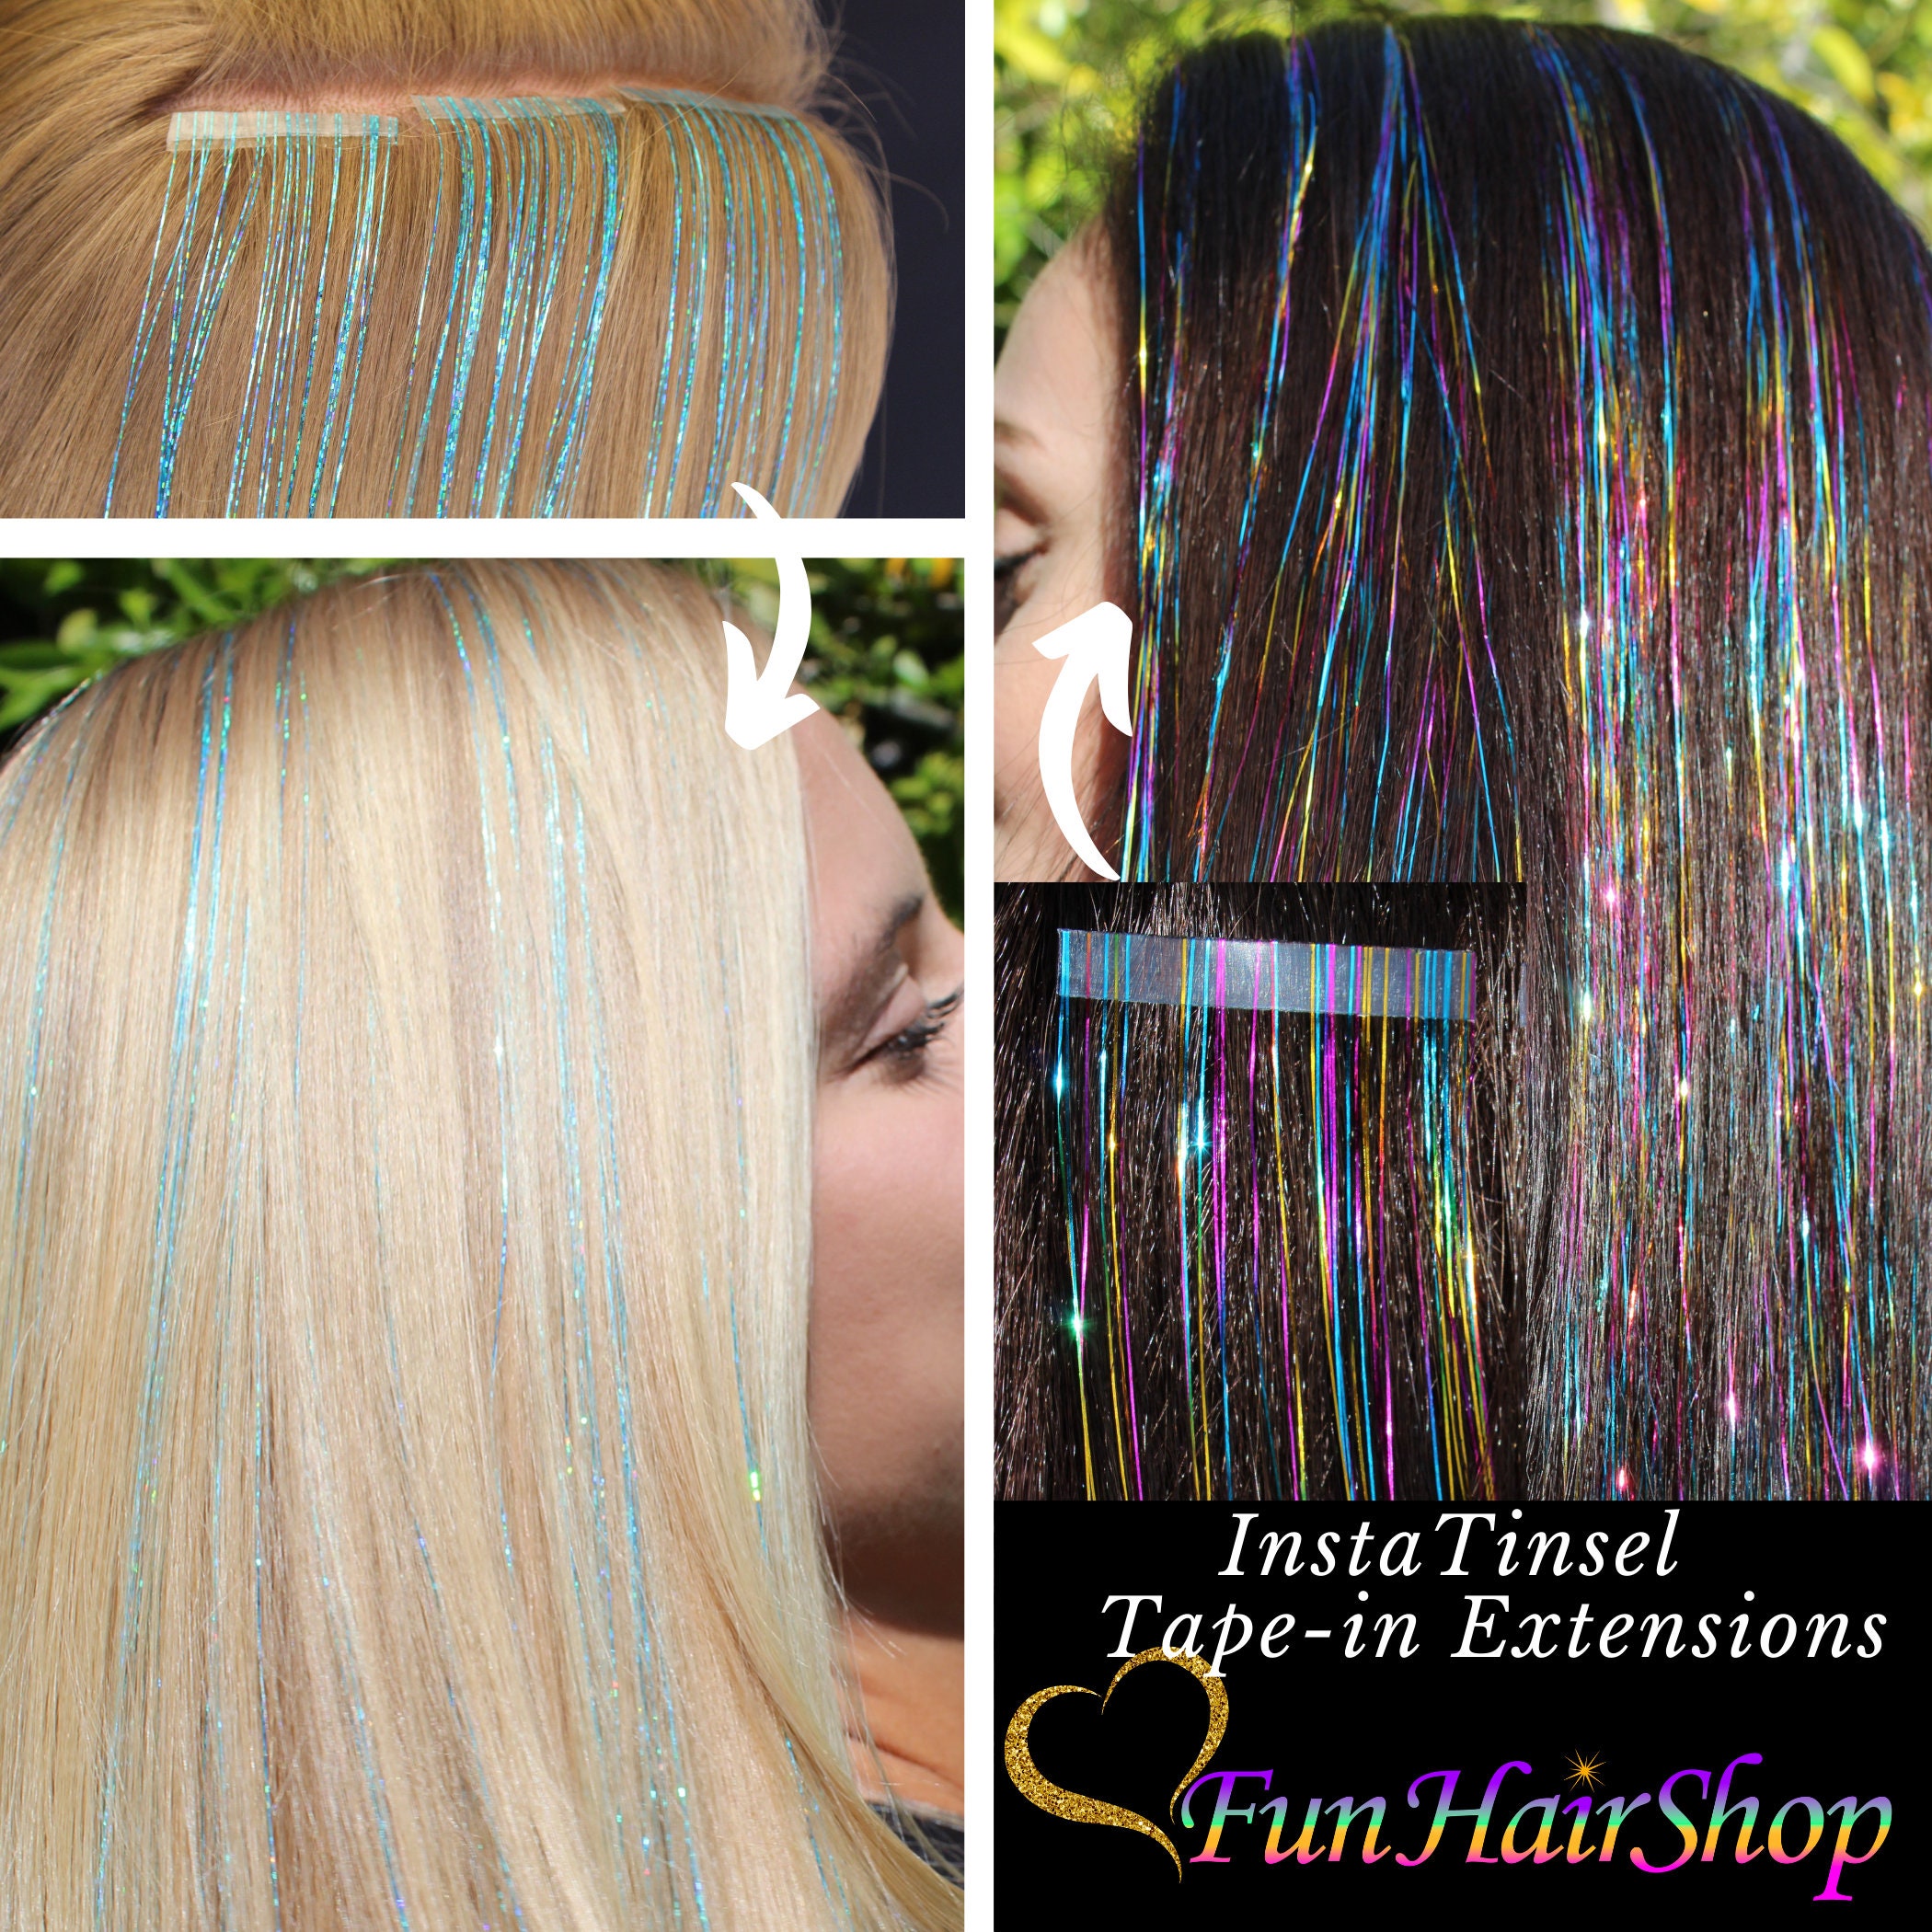 INSTA-TINSEL: Removable Tinsel Strips With 200 Sparkling Bling